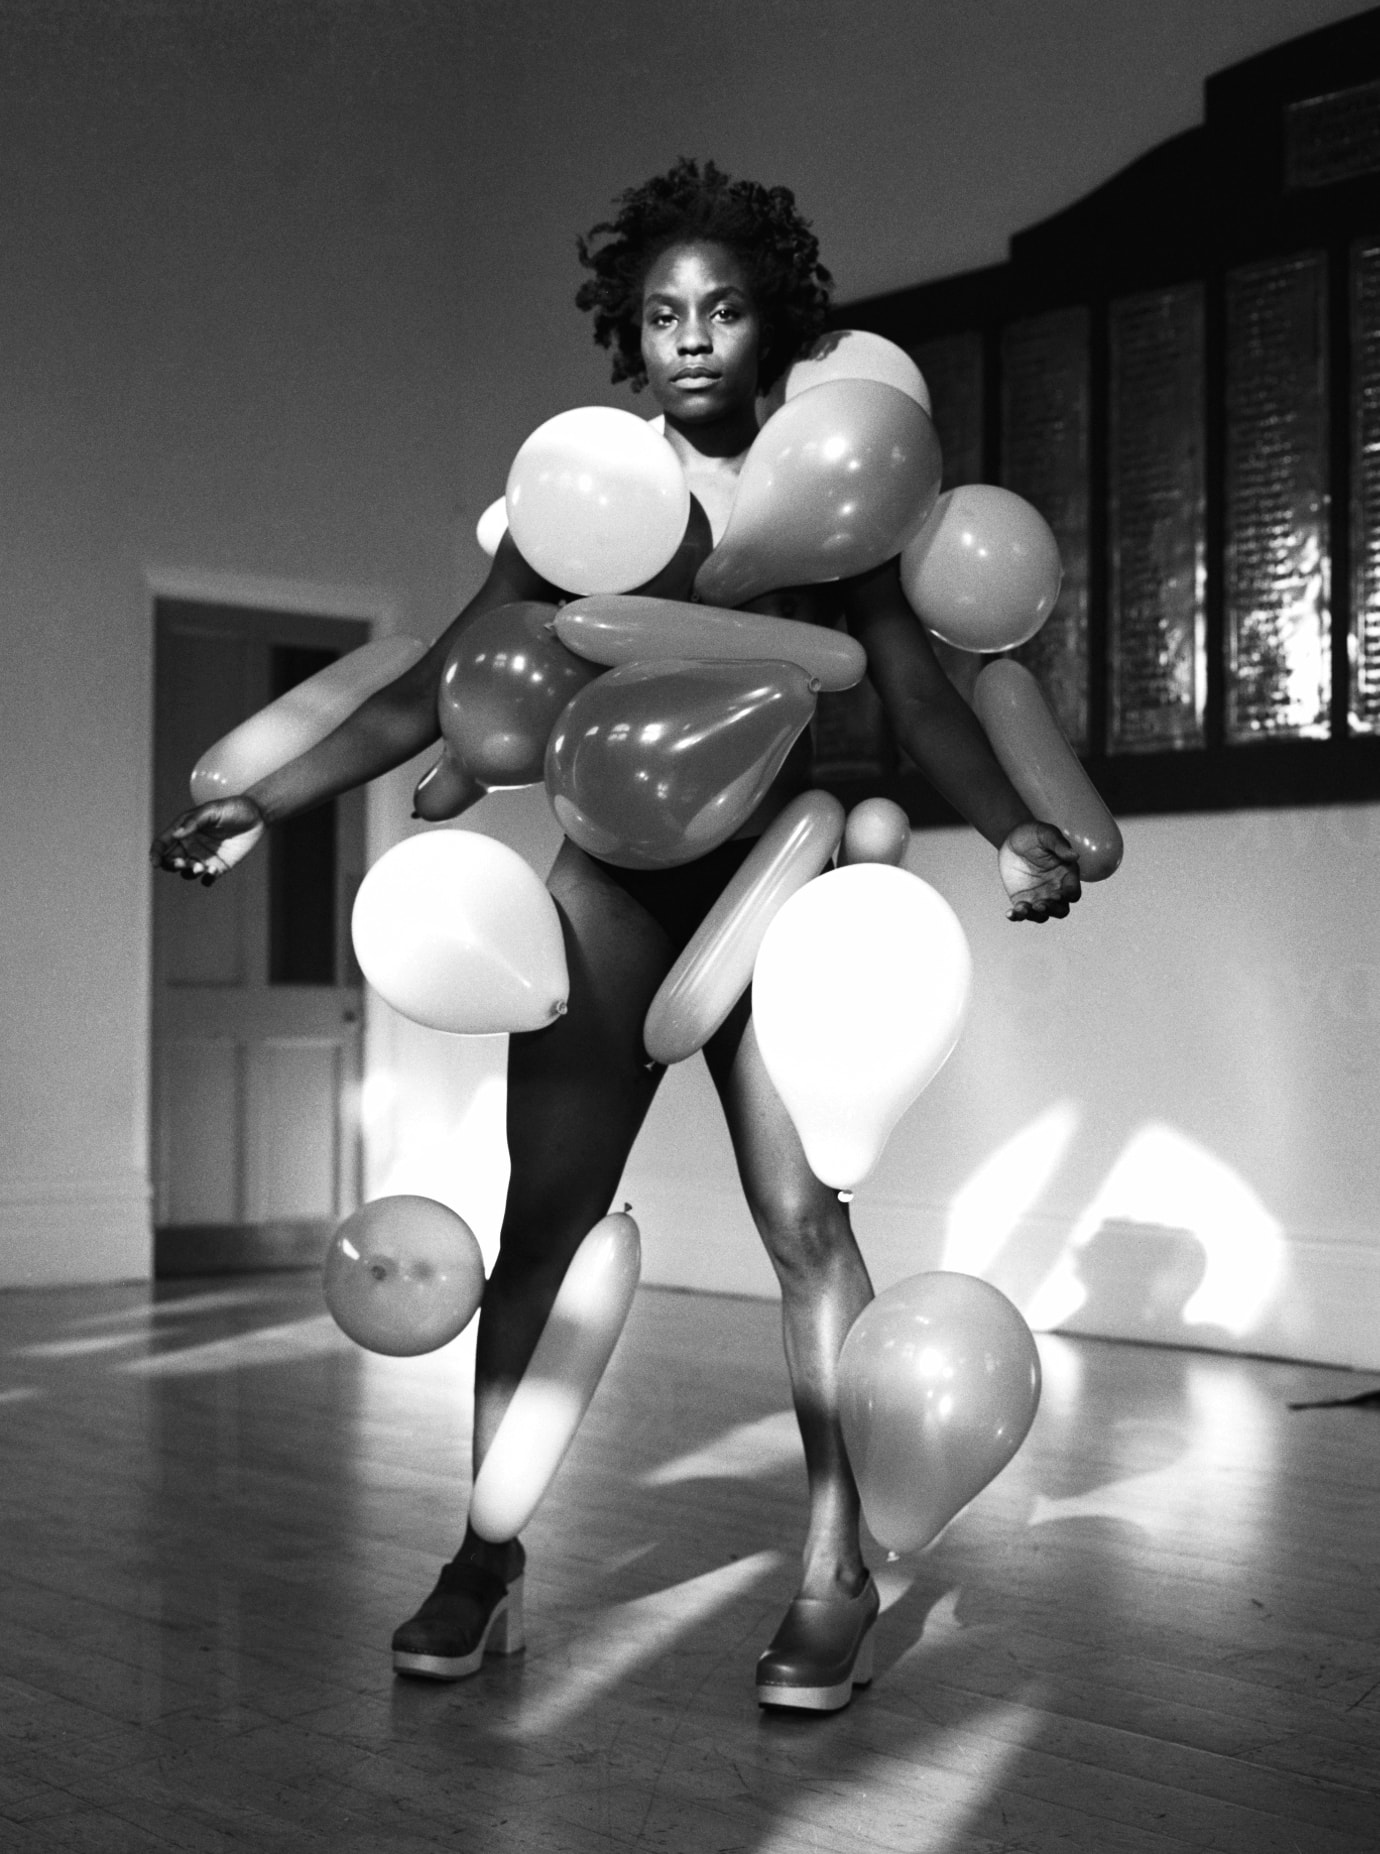 Woman SRSLY by Henry Gorse and i-D Magazine. Performer Valerie Ebuwa